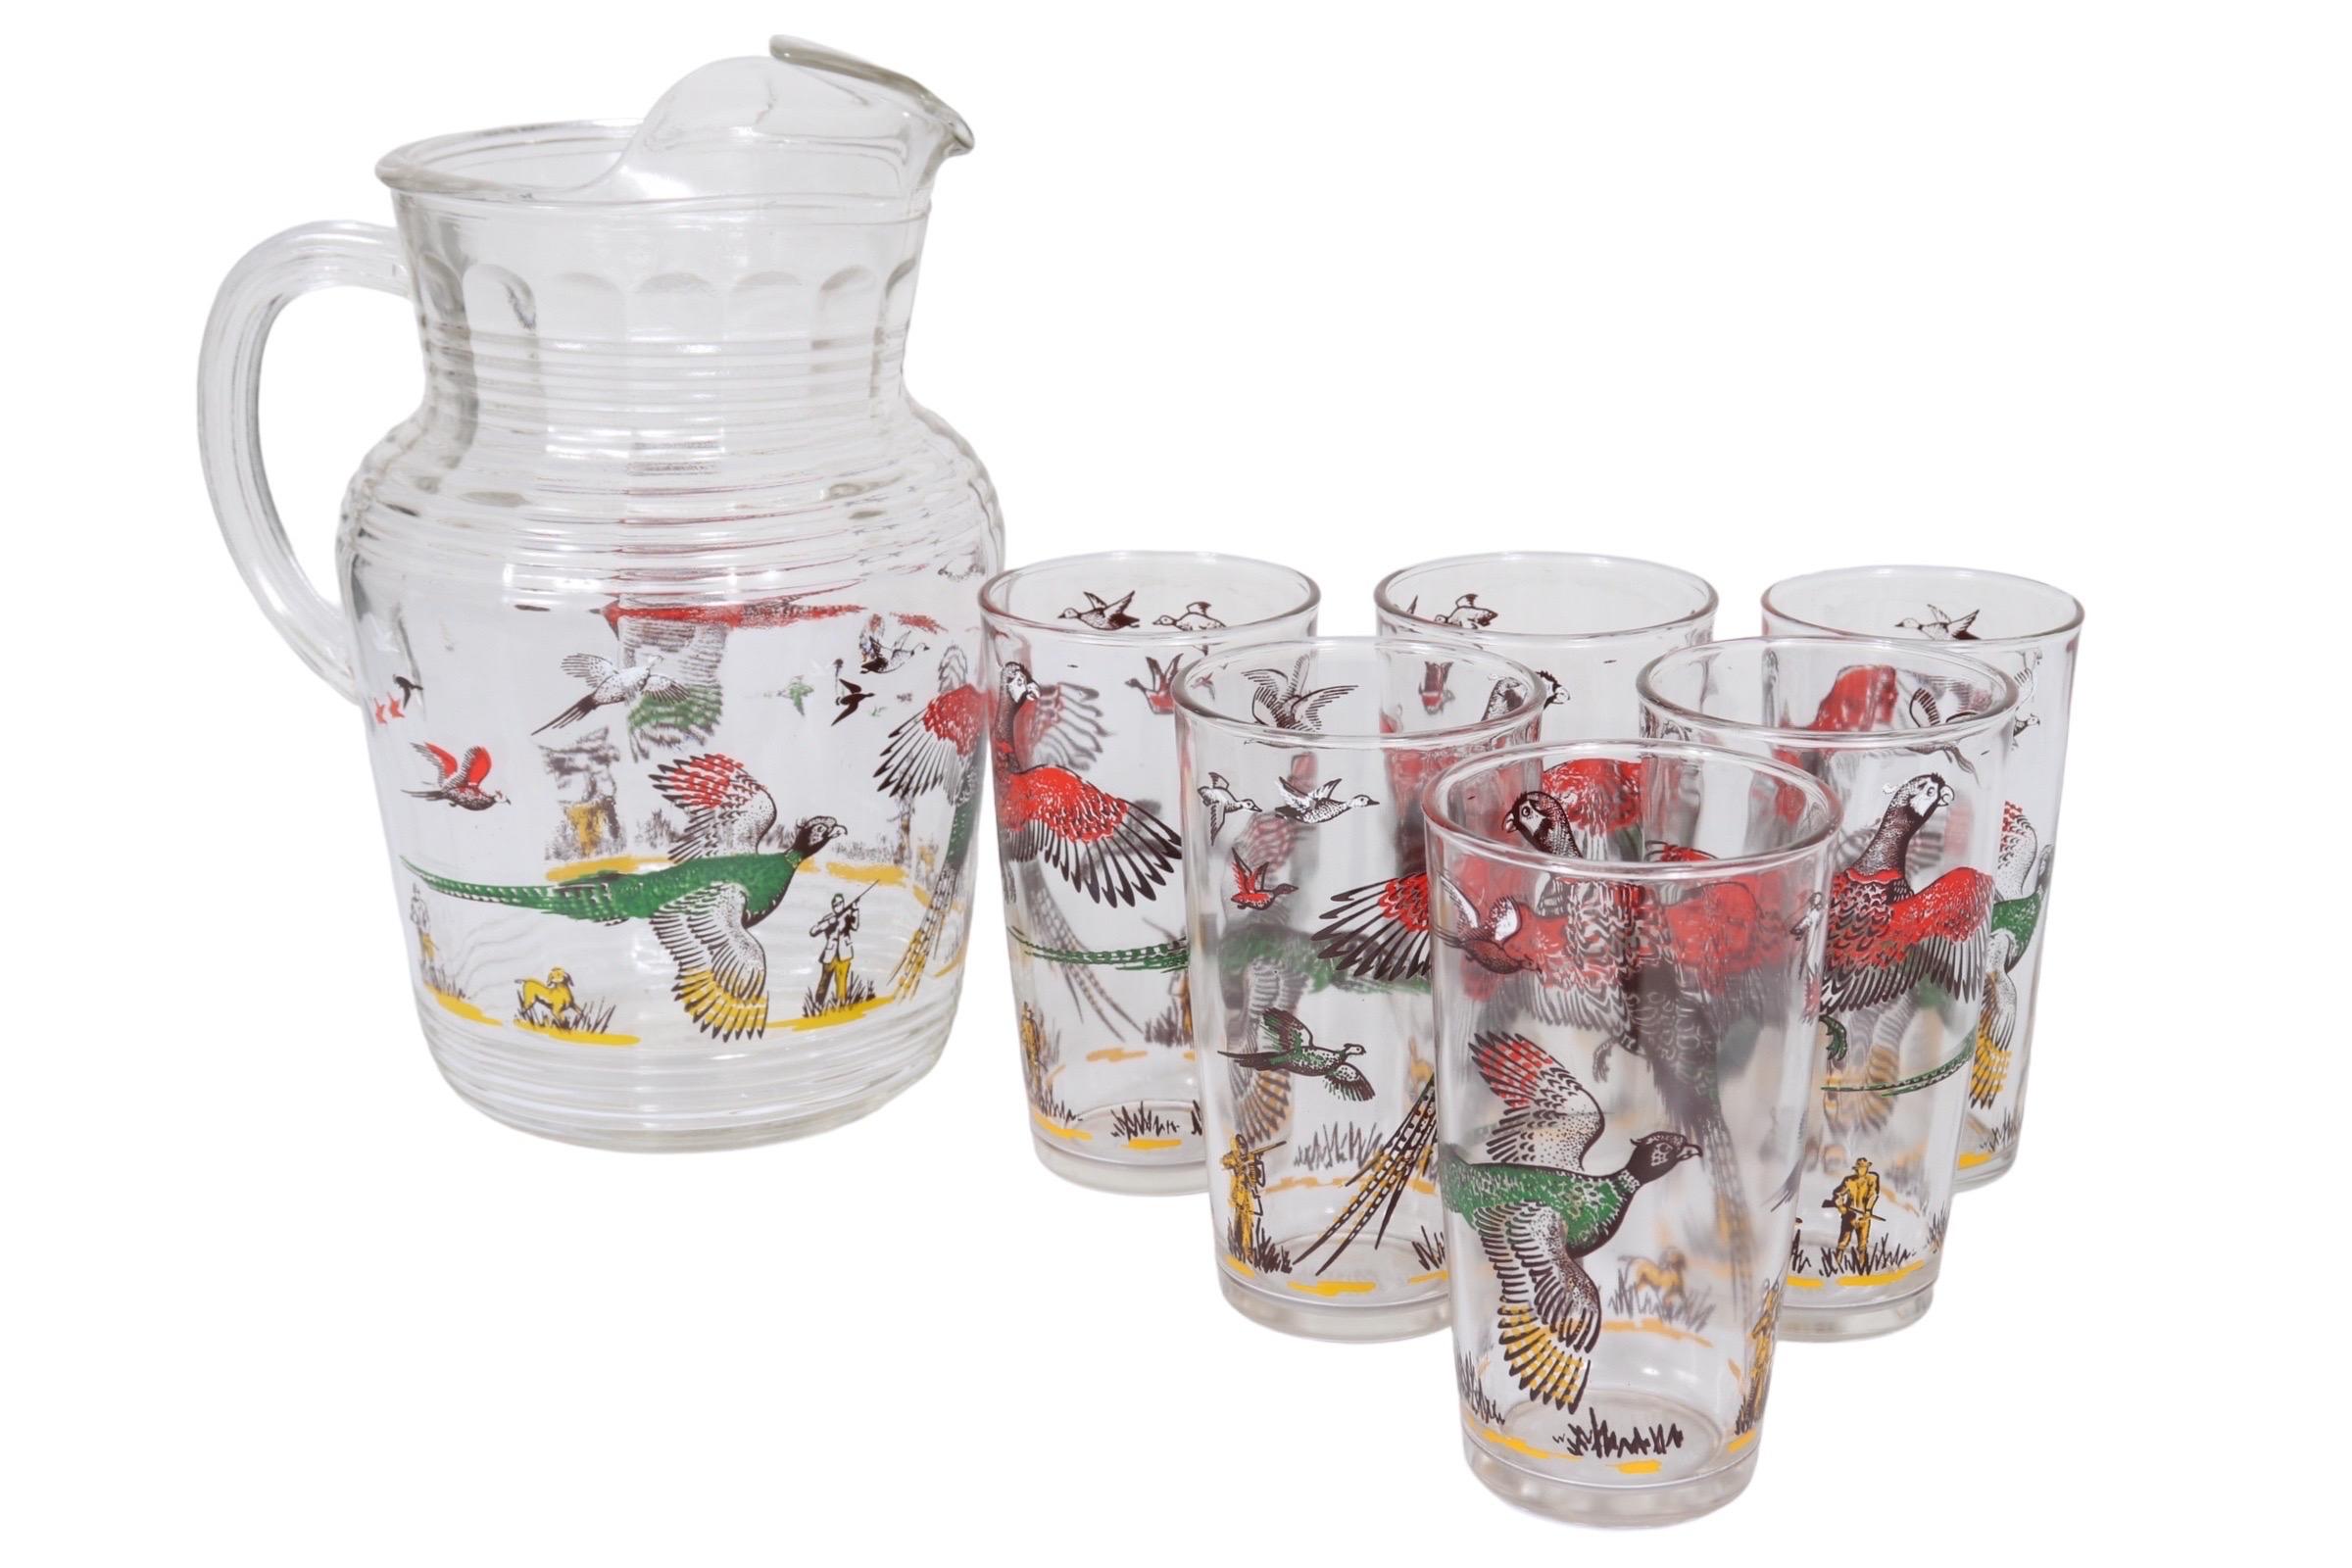 A set of six transferware 8oz highball glasses and matching 80oz pitcher in the Pheasants pattern by Hazel-Atlas Glass Company (1902-1964). Colorful pheasants in red, green and yellow fly above yellow hunters and a dog in a yellow field. Each glass